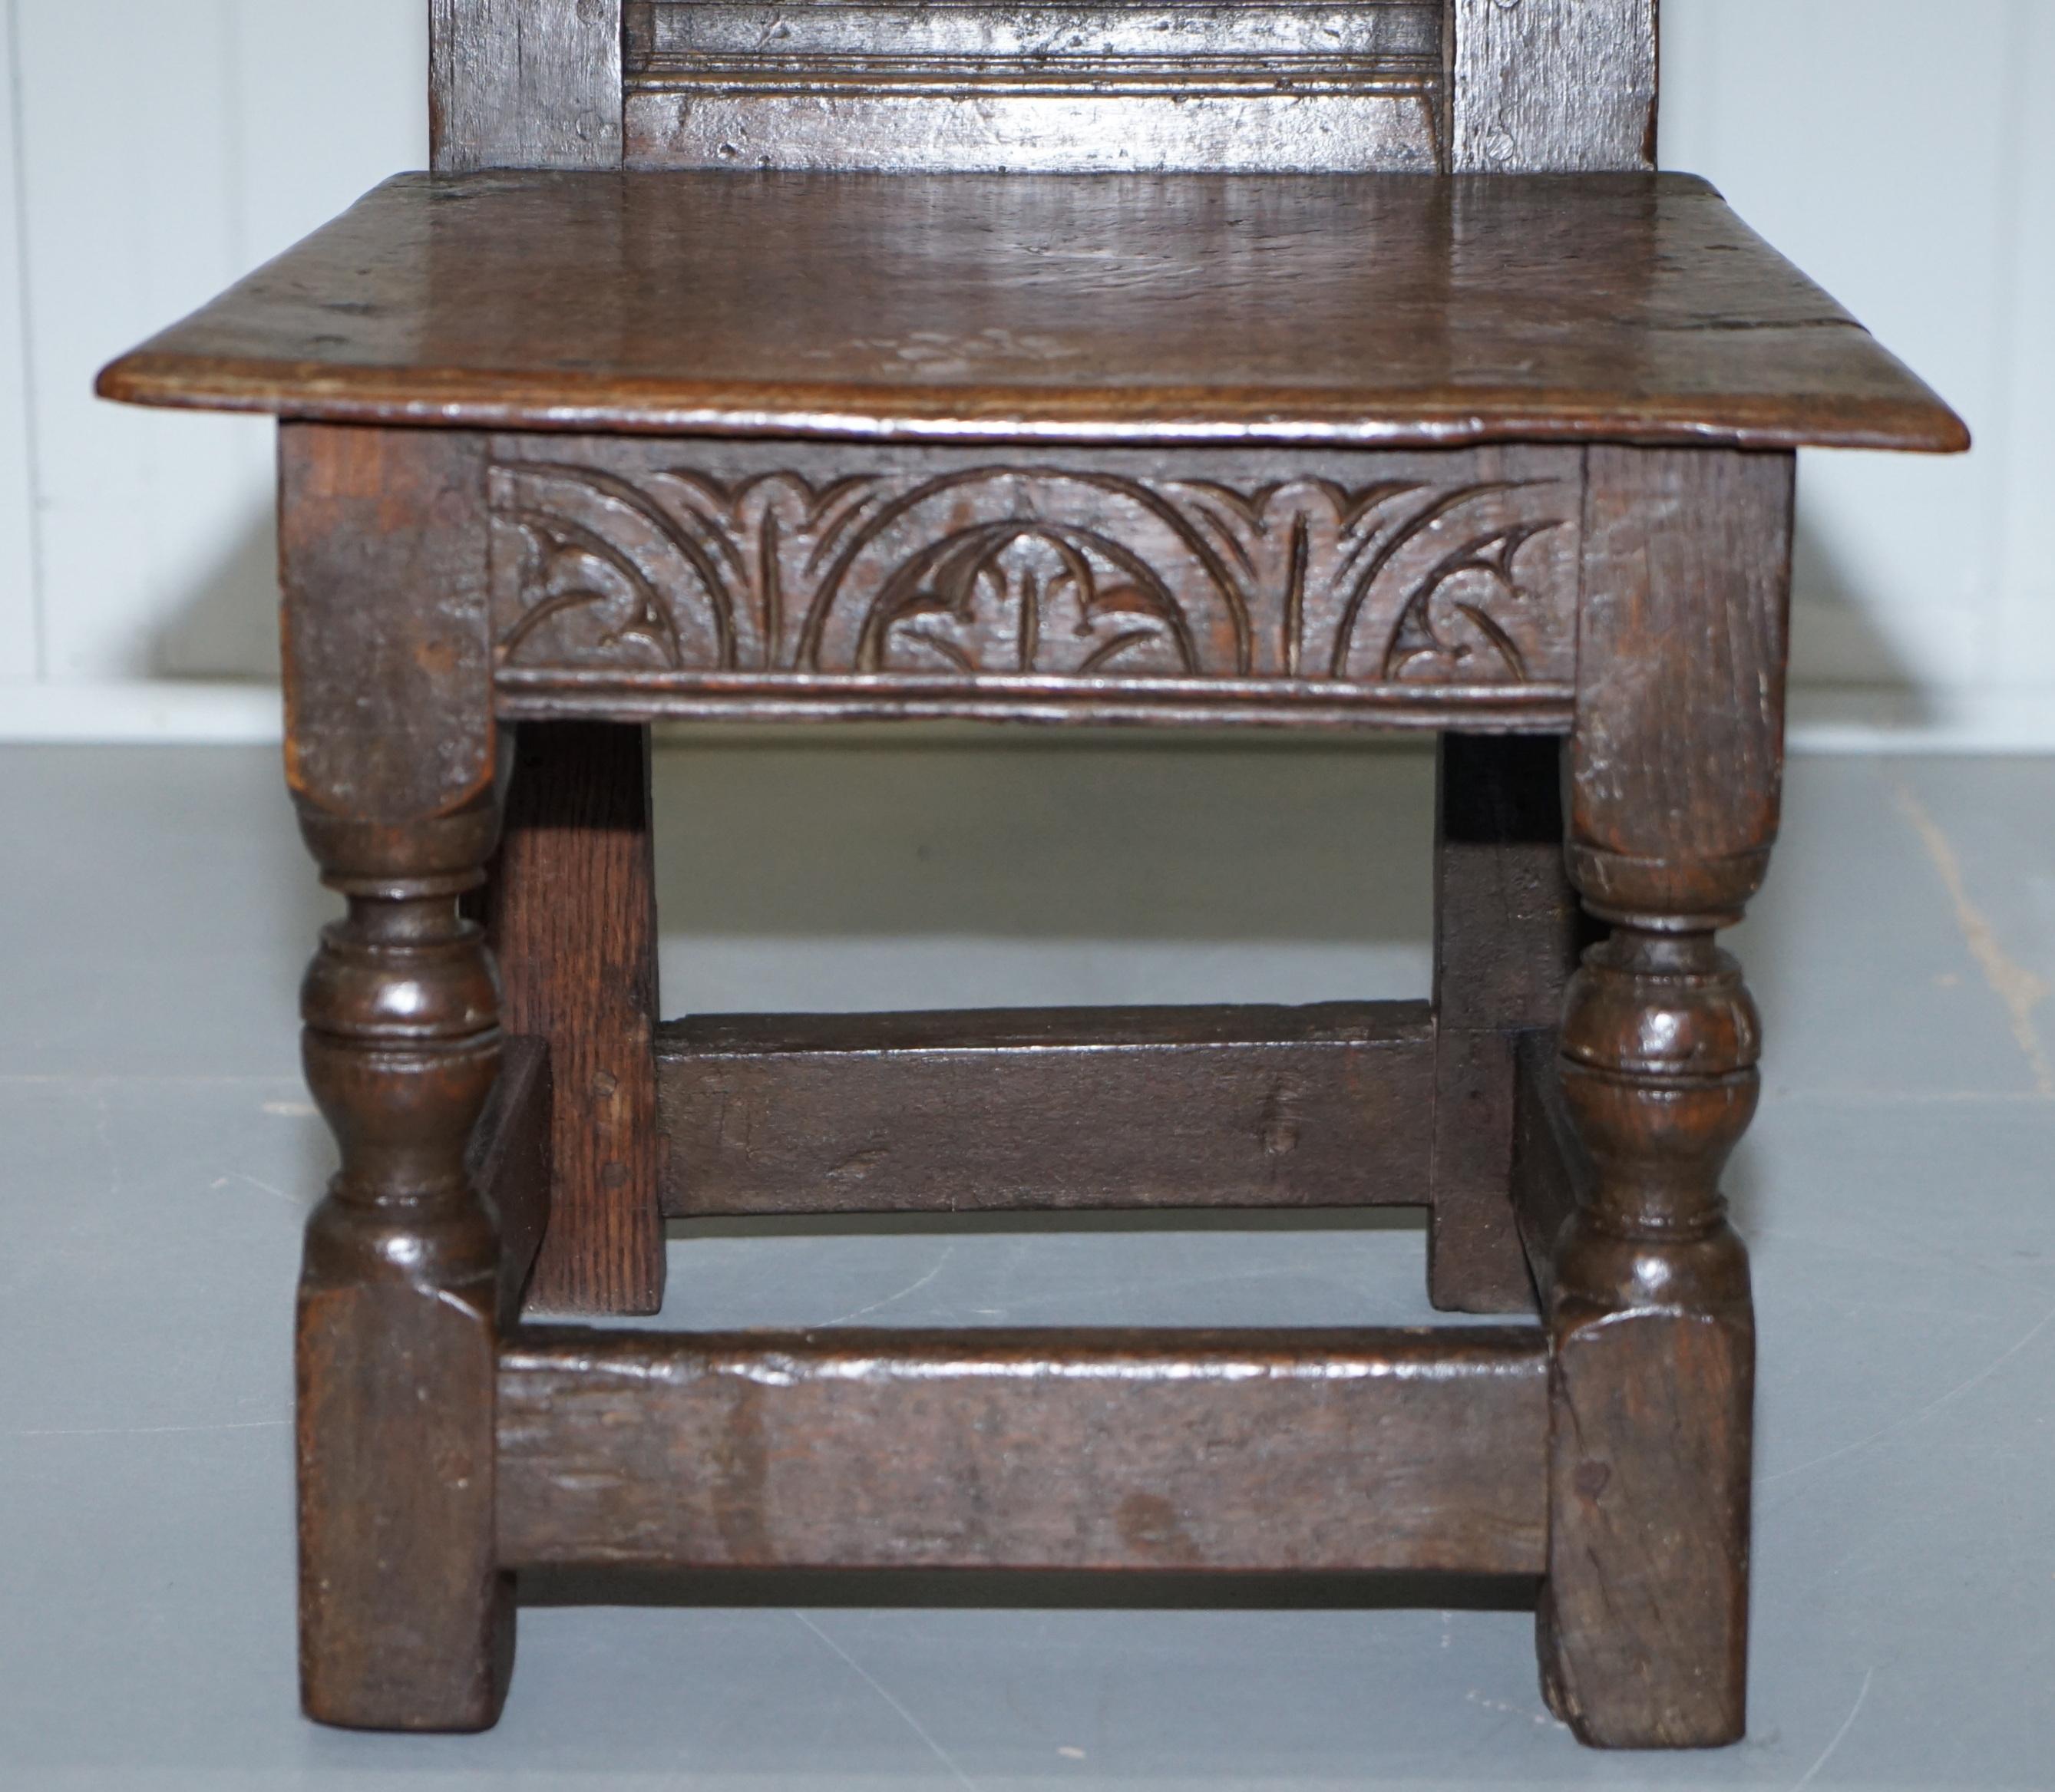 Fruitwood Rare circa 1760 Fruit Wood Chair Nicely Carved Quite Small 18th Century Example For Sale